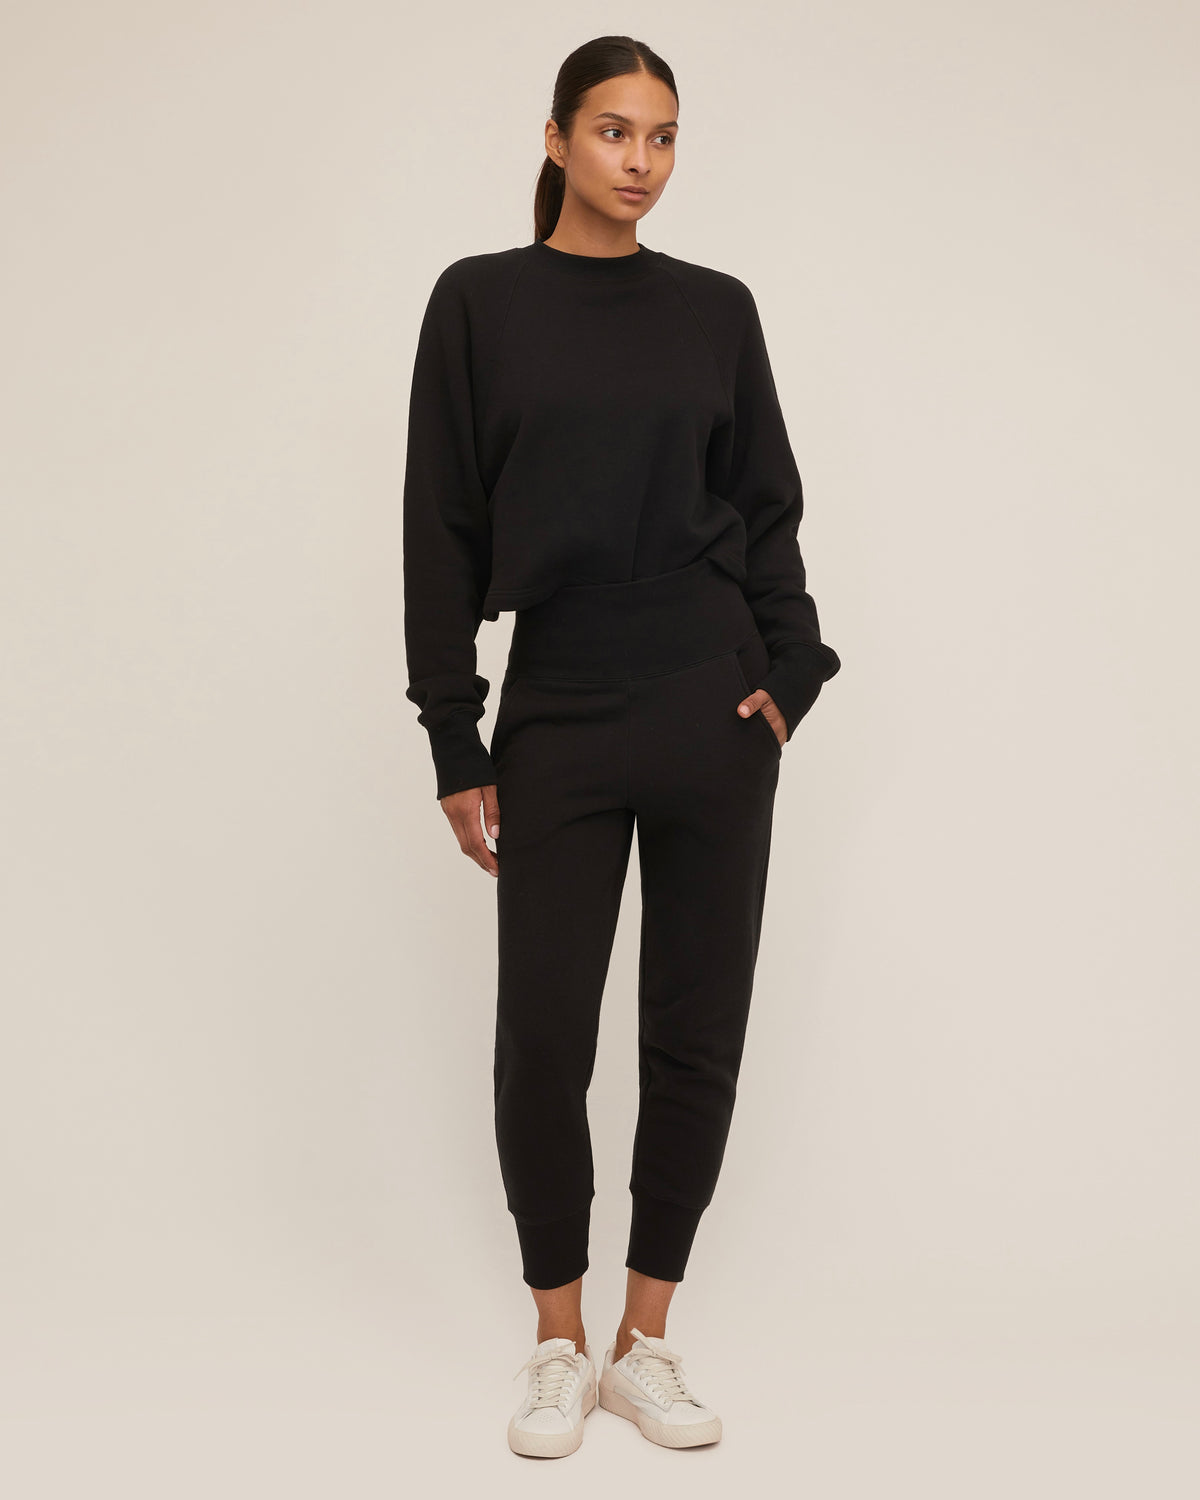 So High Waisted French Terry Sweatpants in Black